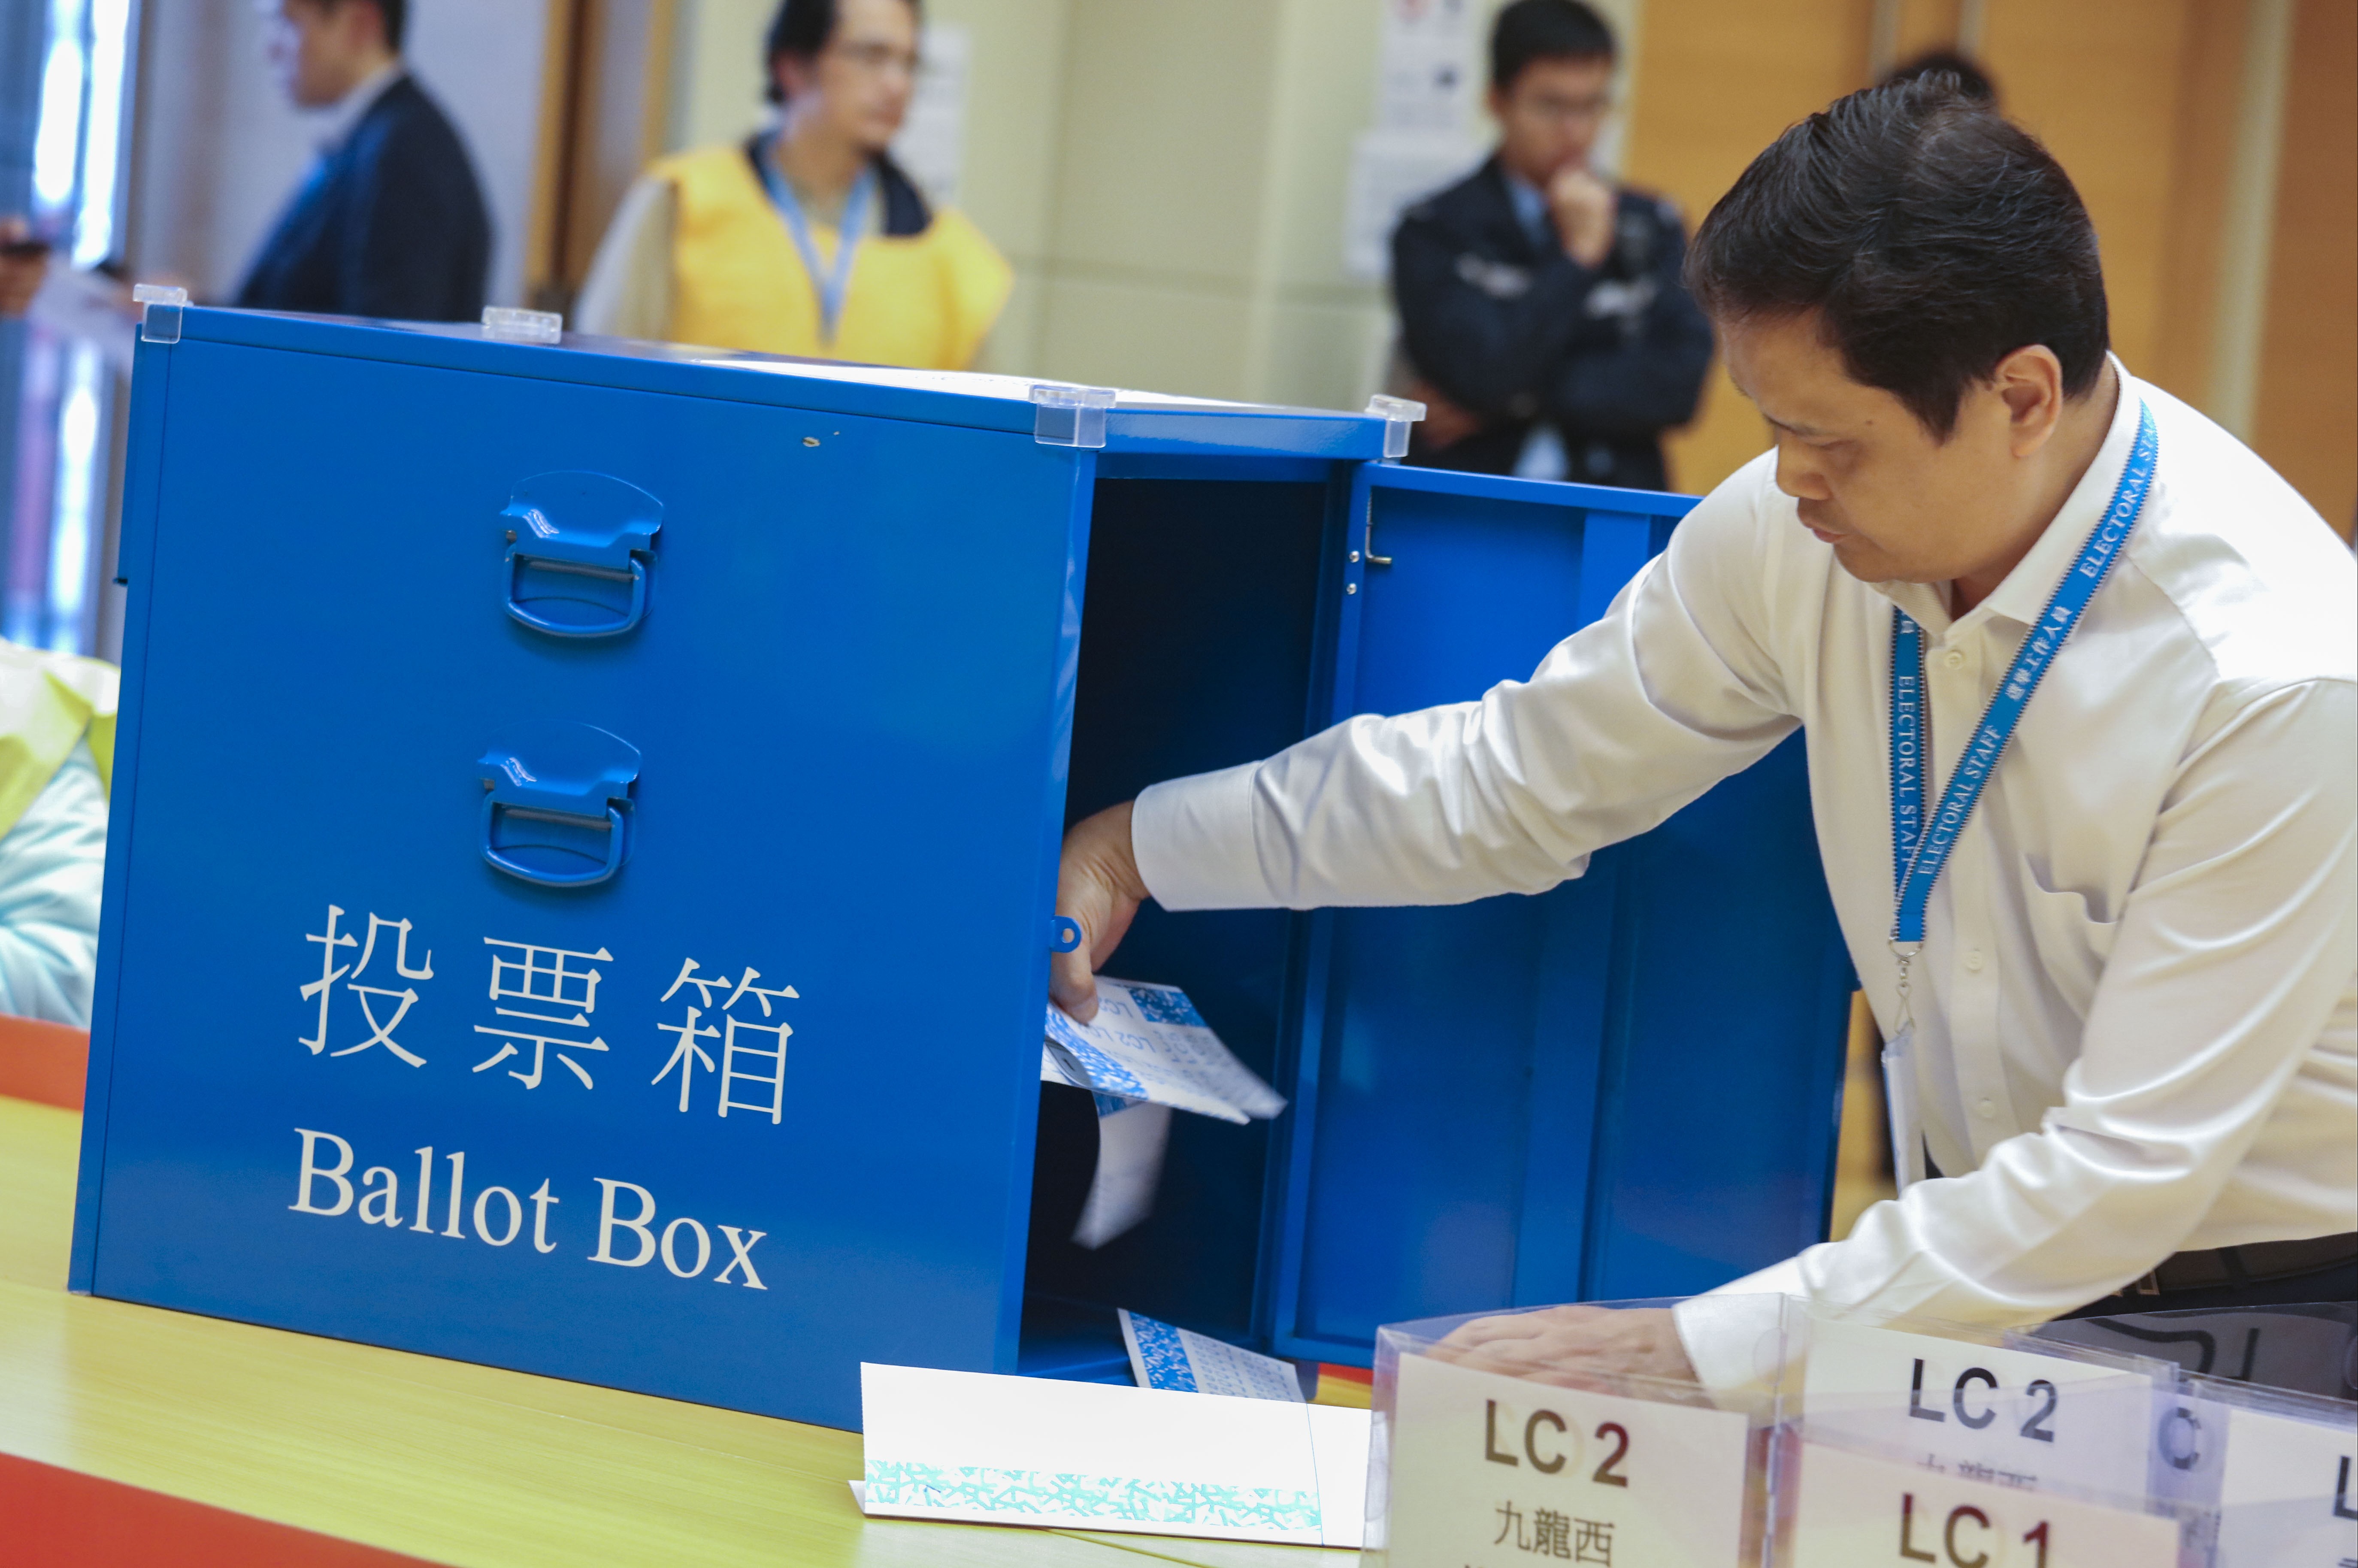 Ballot boxes are sorted into different constituencies during the 2018 Legislative Council by-election. Photo: Felix Wong